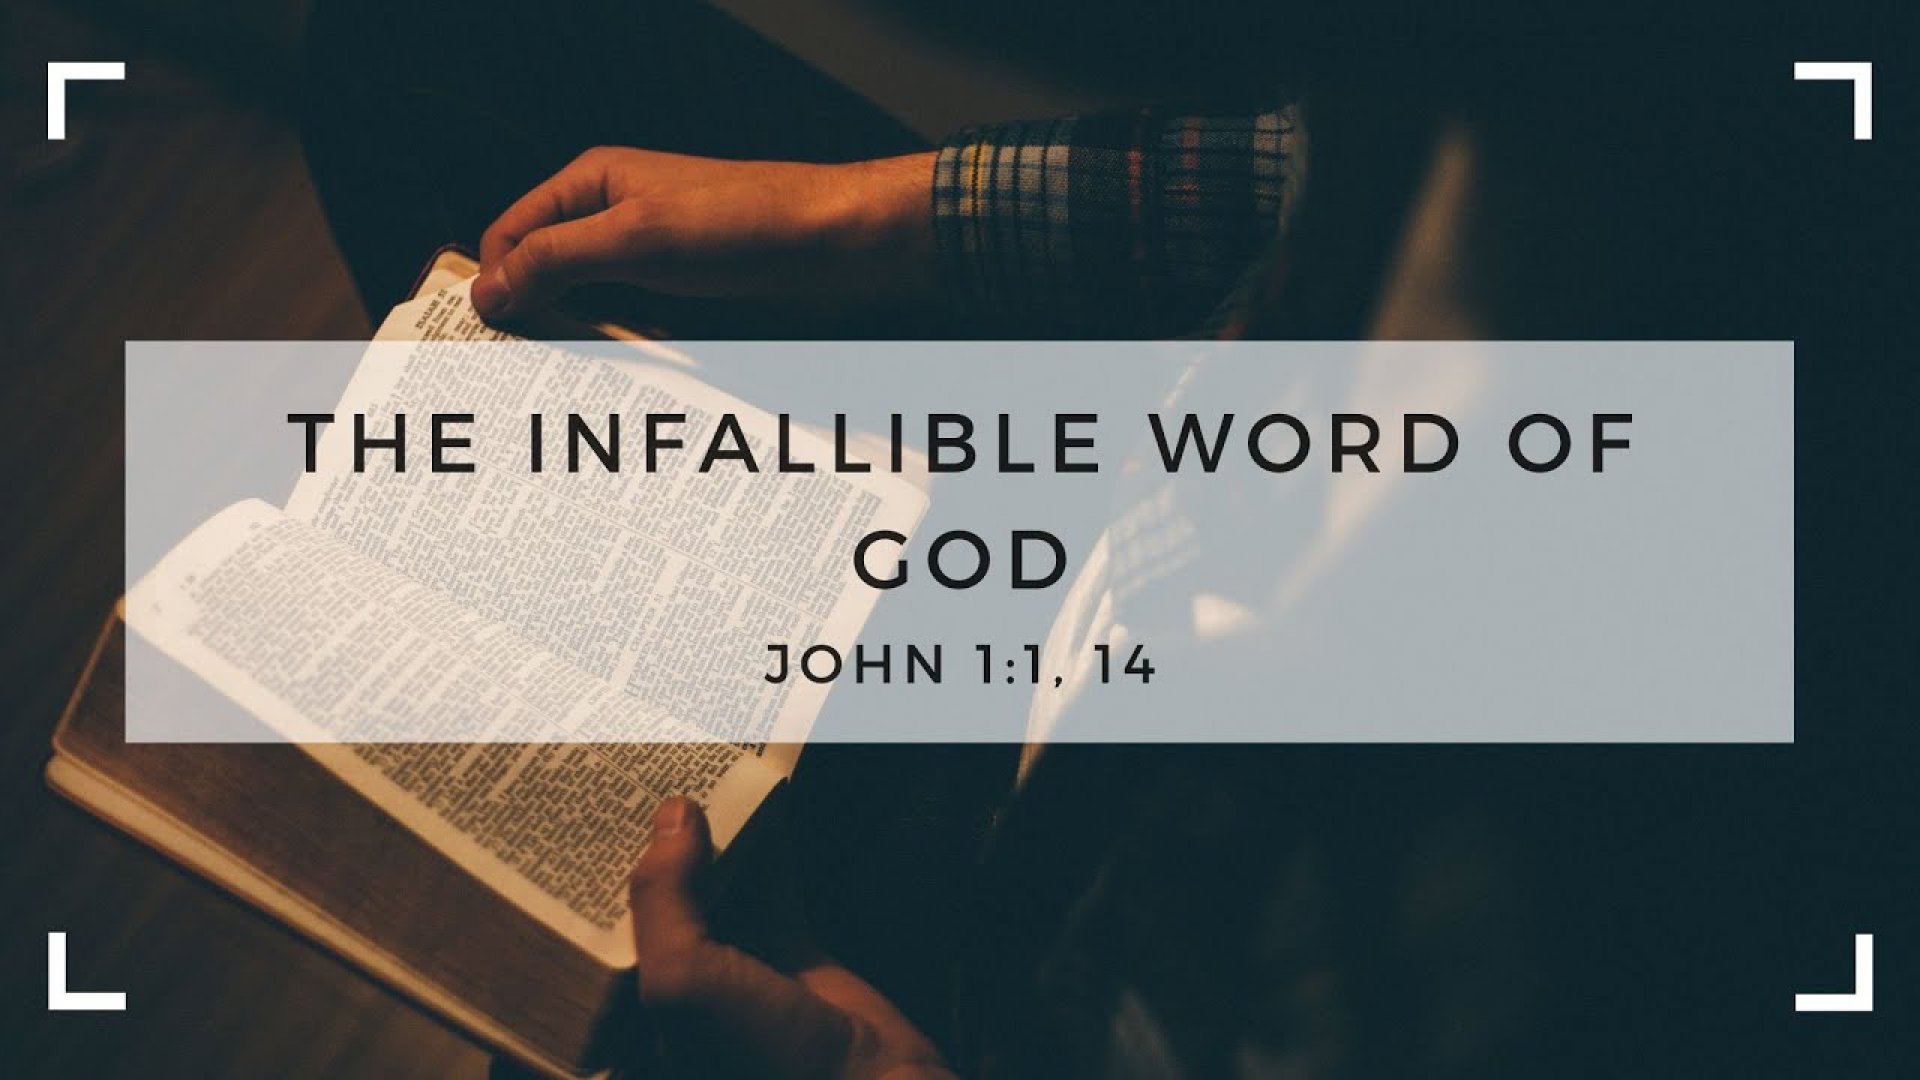 The Infallible Impregnable Word